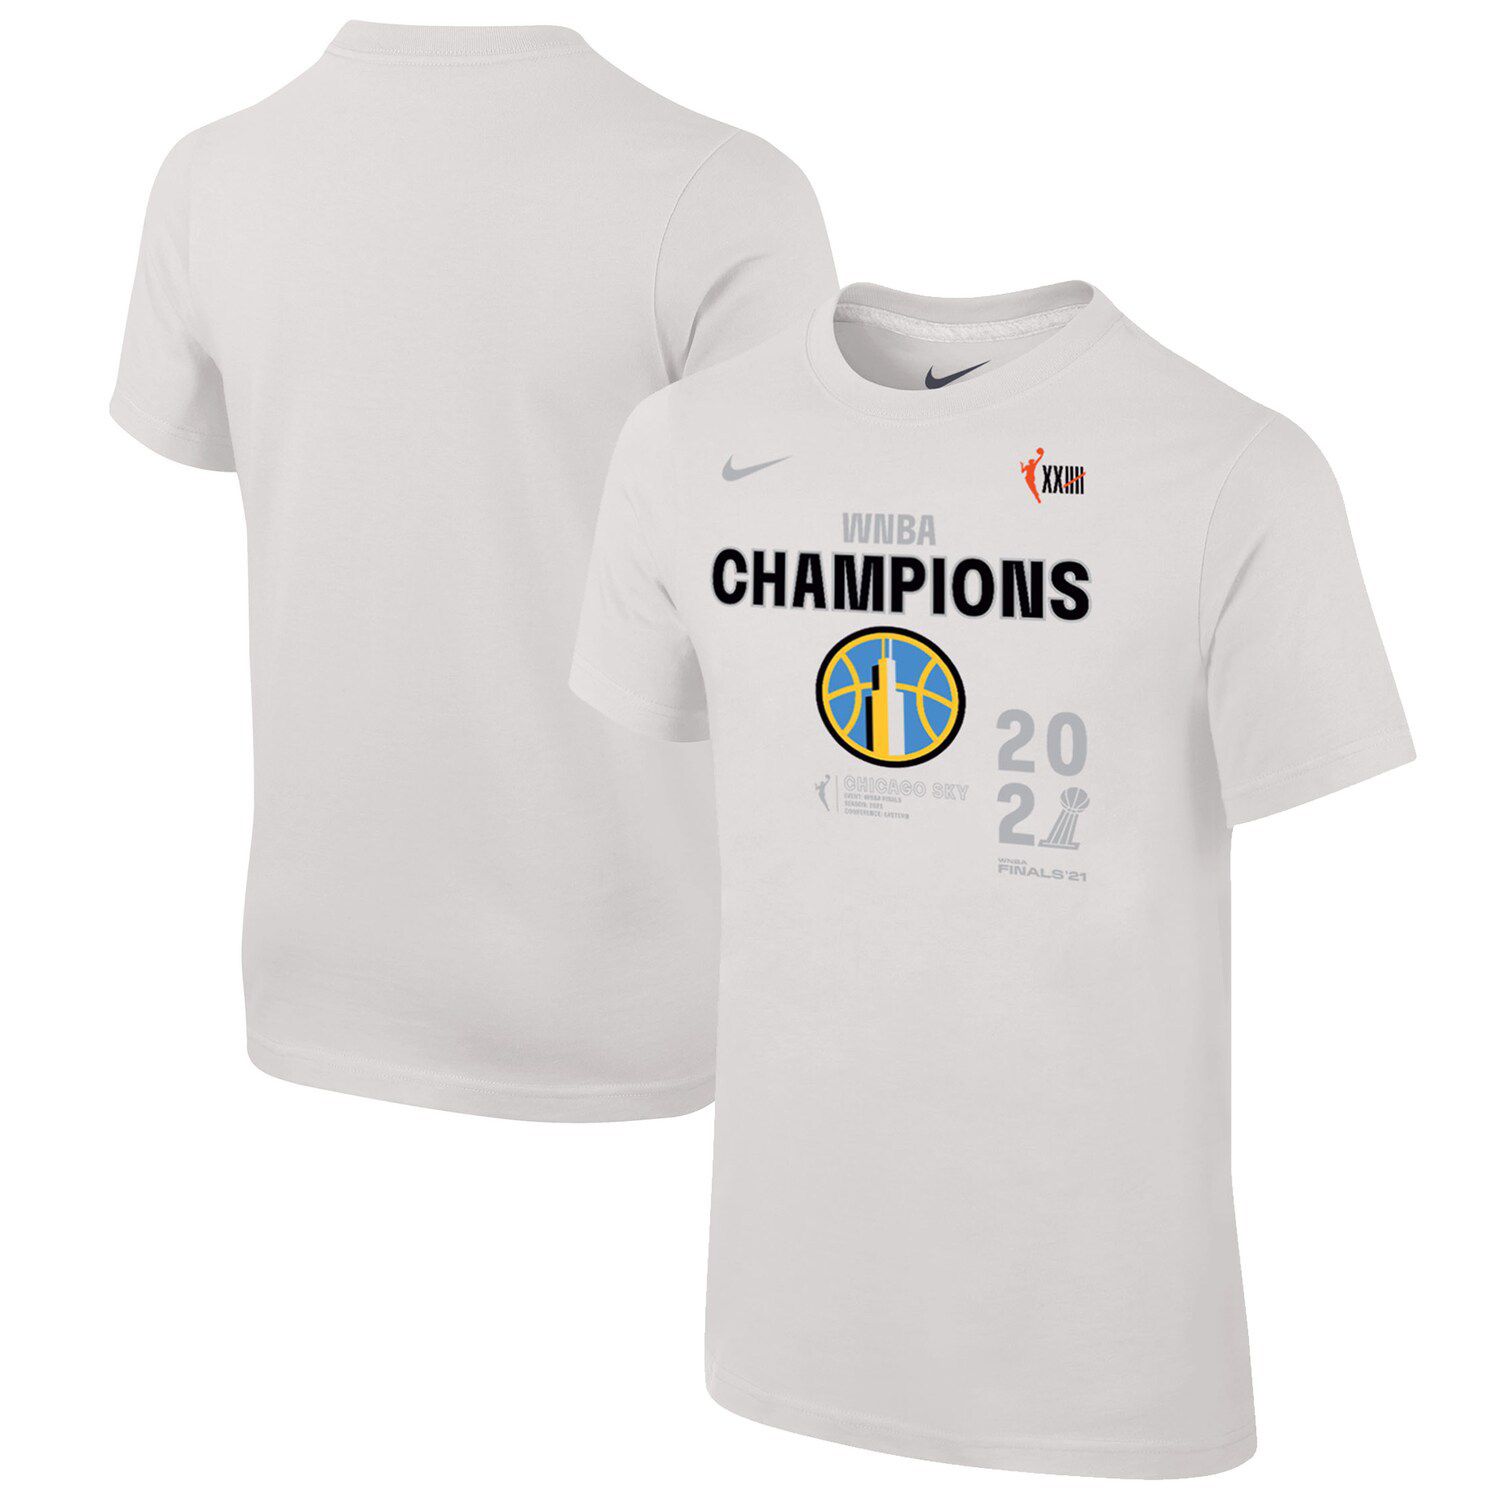 Fanatics Branded Heathered Royal Golden State Warriors Where Legends Play Iconic Practice Long Sleev